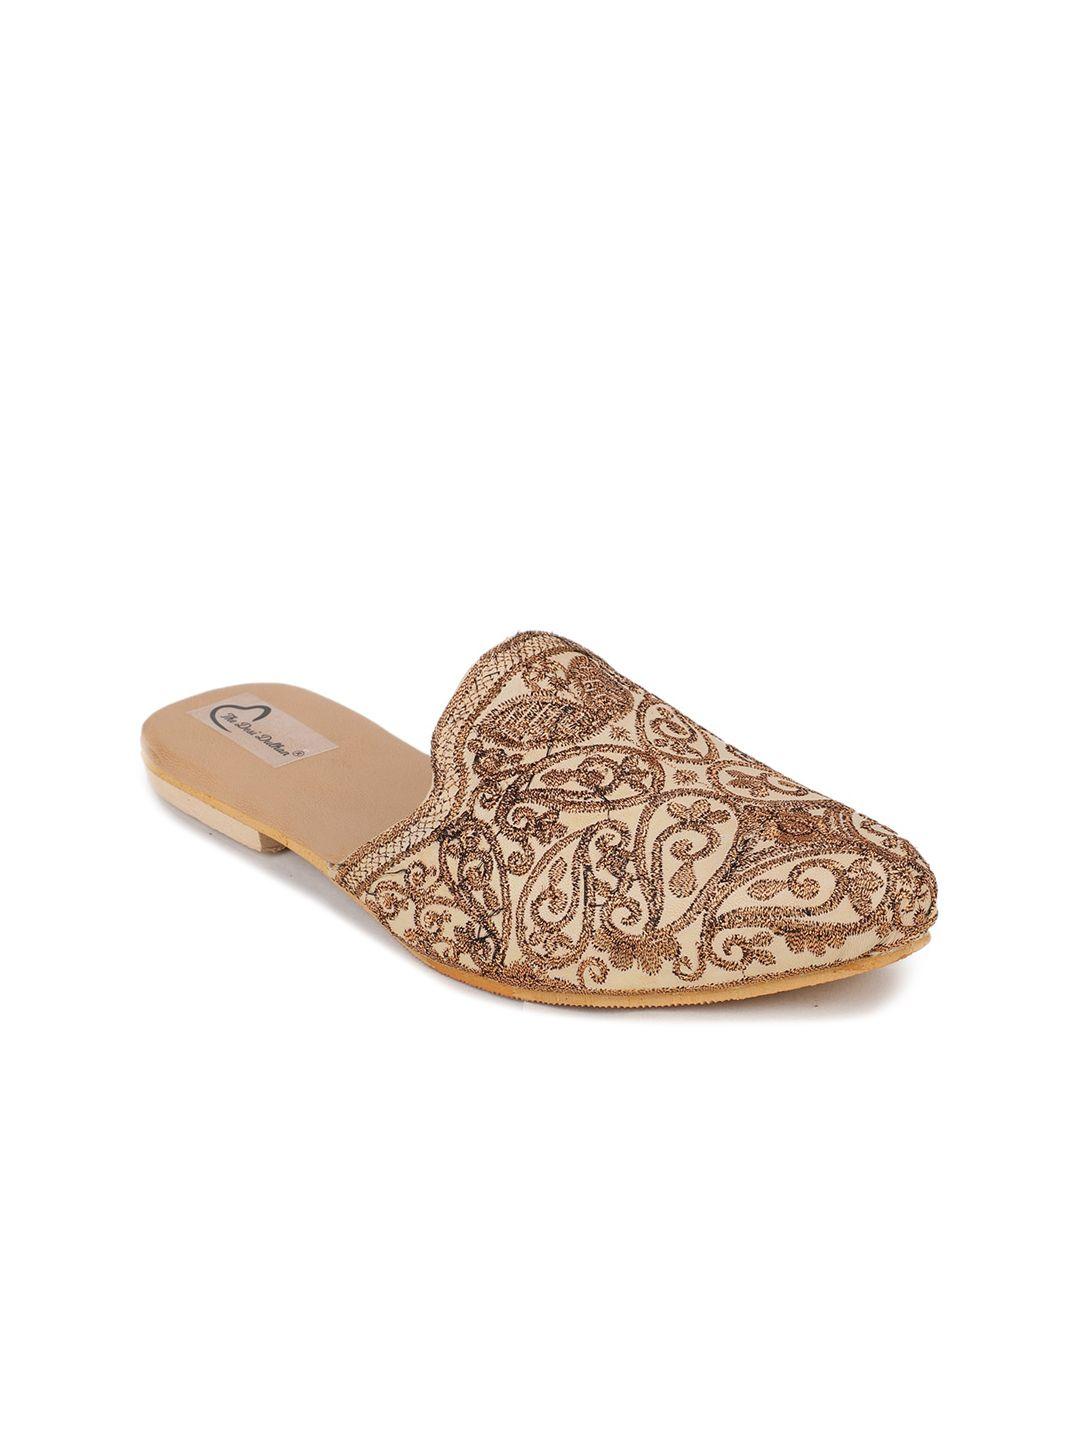 the desi dulhan women cream-coloured textured leather ethnic flats